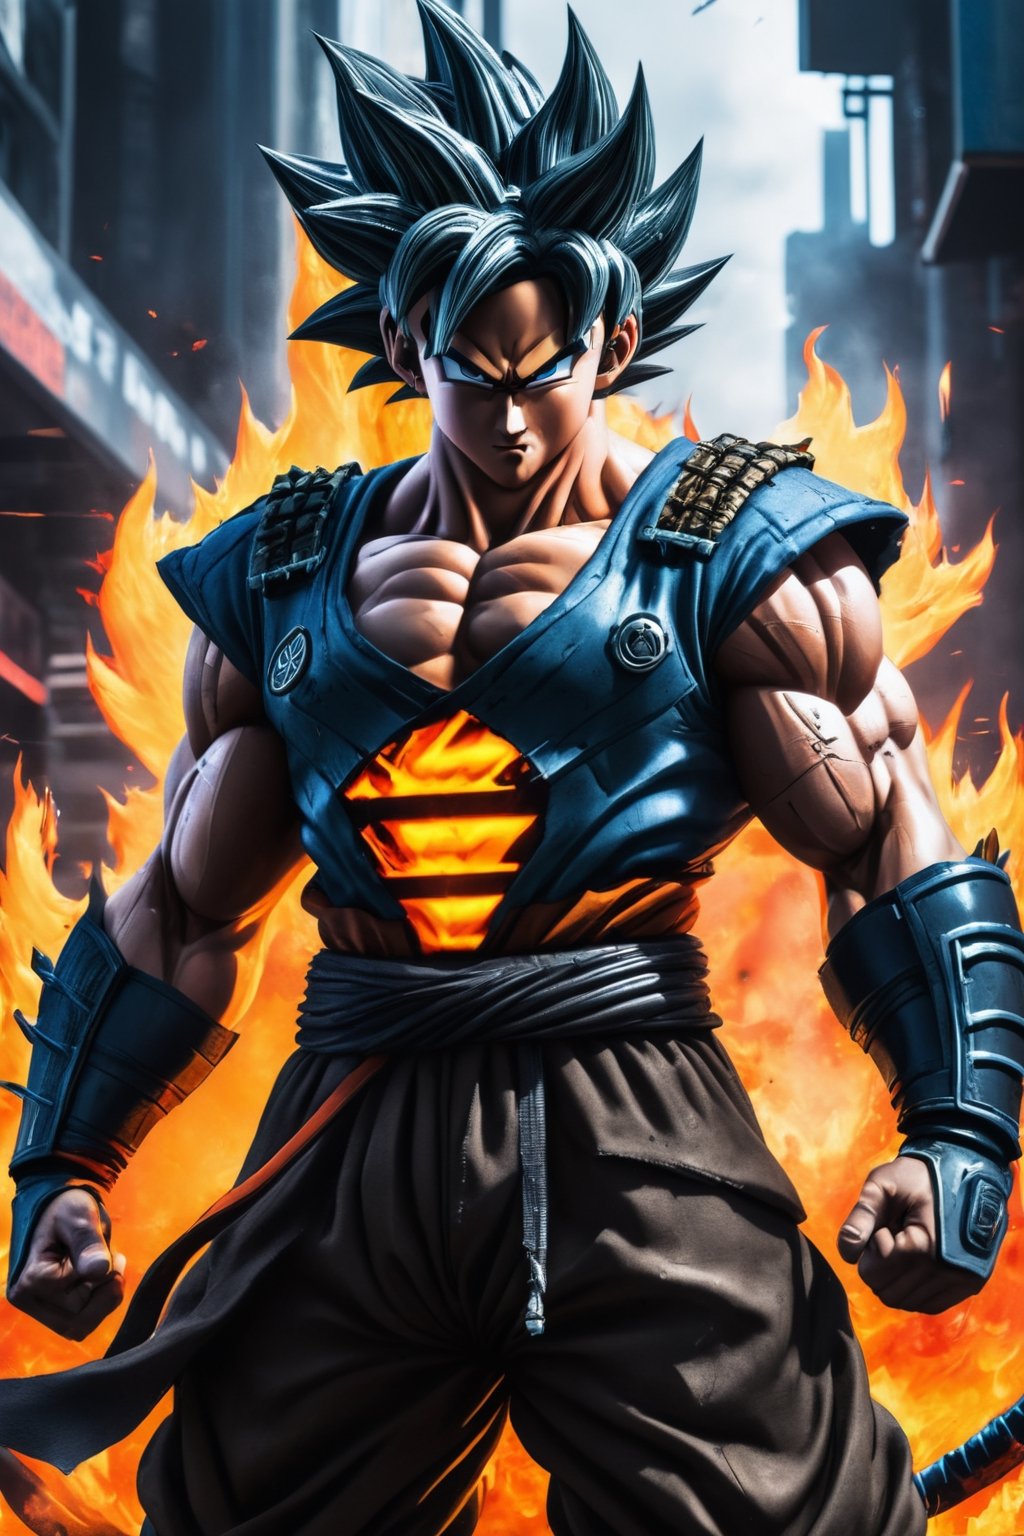 Super detailed Dragon Ball Goku, strong exaggerated body, body emitting flames, wearing armor, cyberpunk city, movie environment.